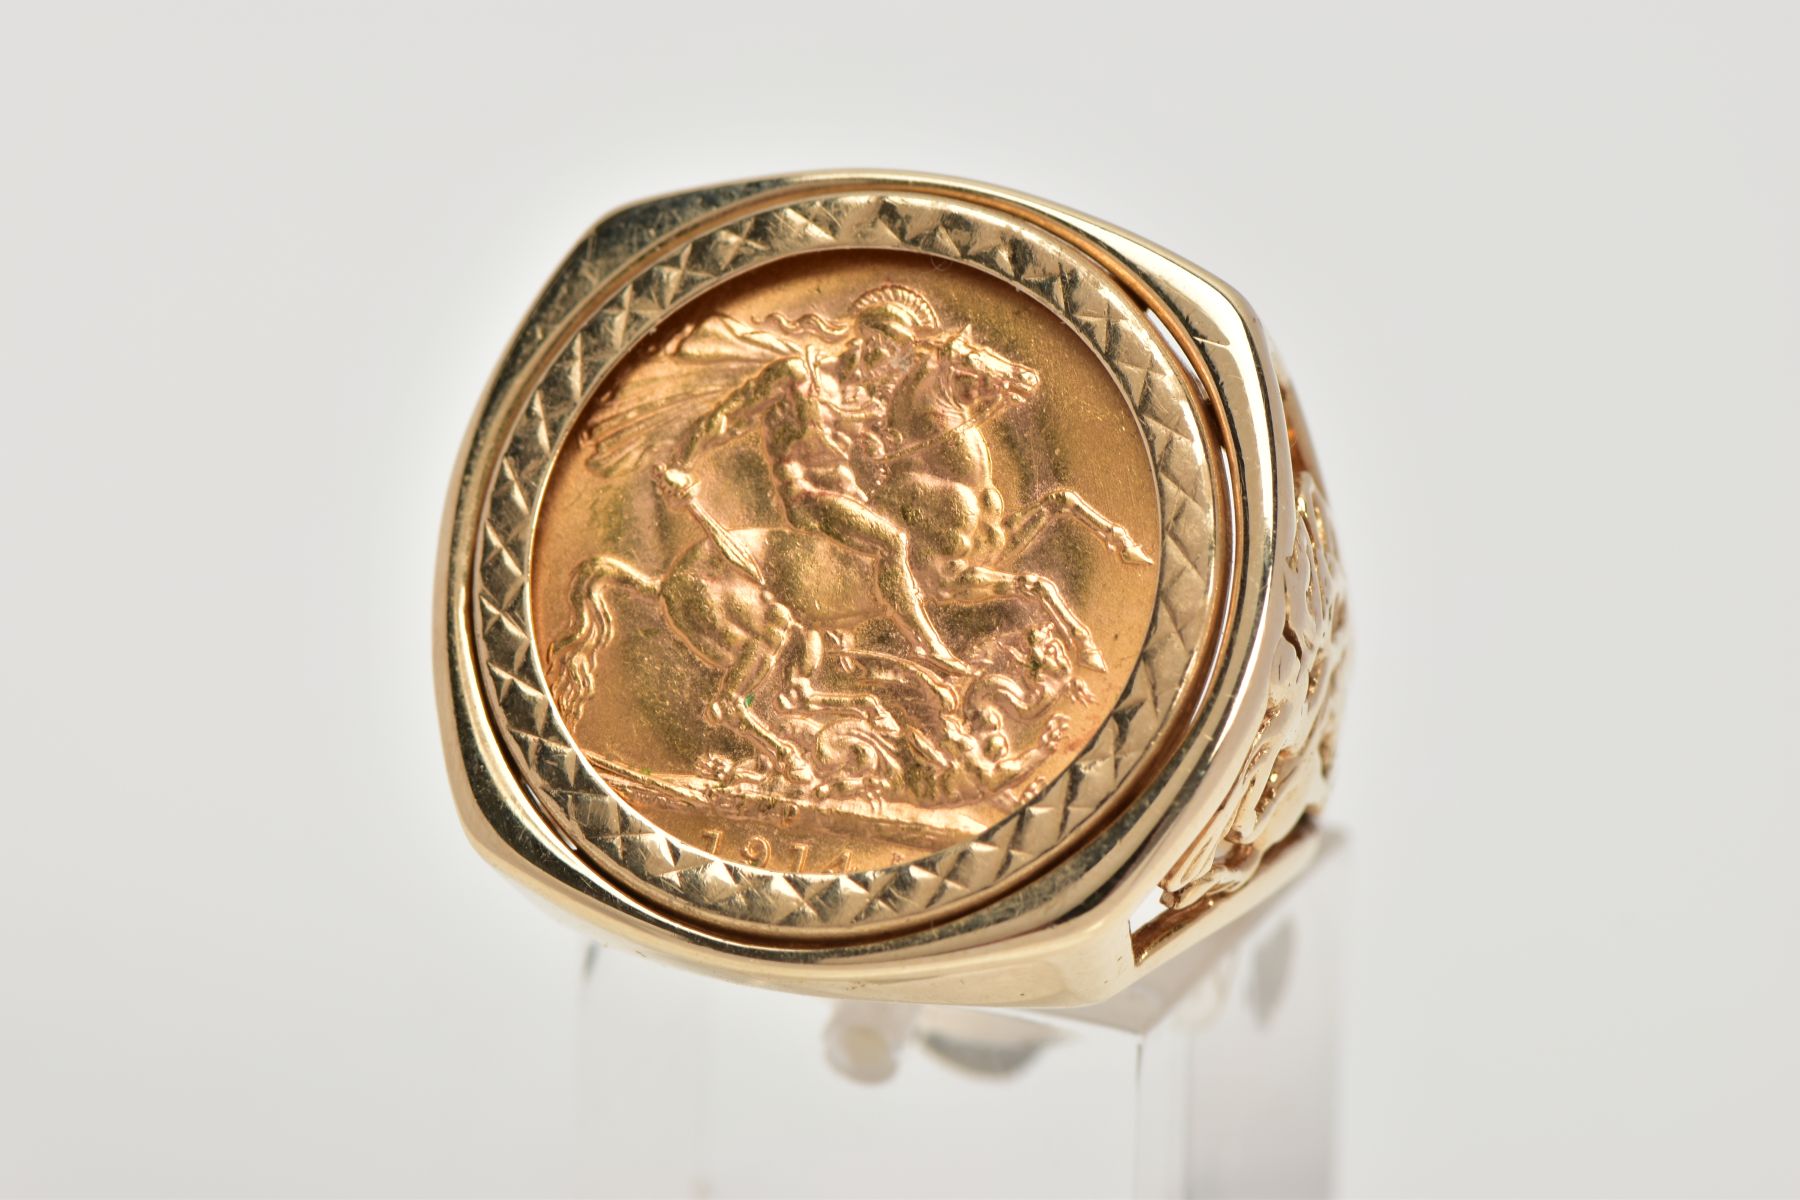 A SOVEREIGN RING, the 1914 George V sovereign within a 9ct gold ring mount with pierced George and